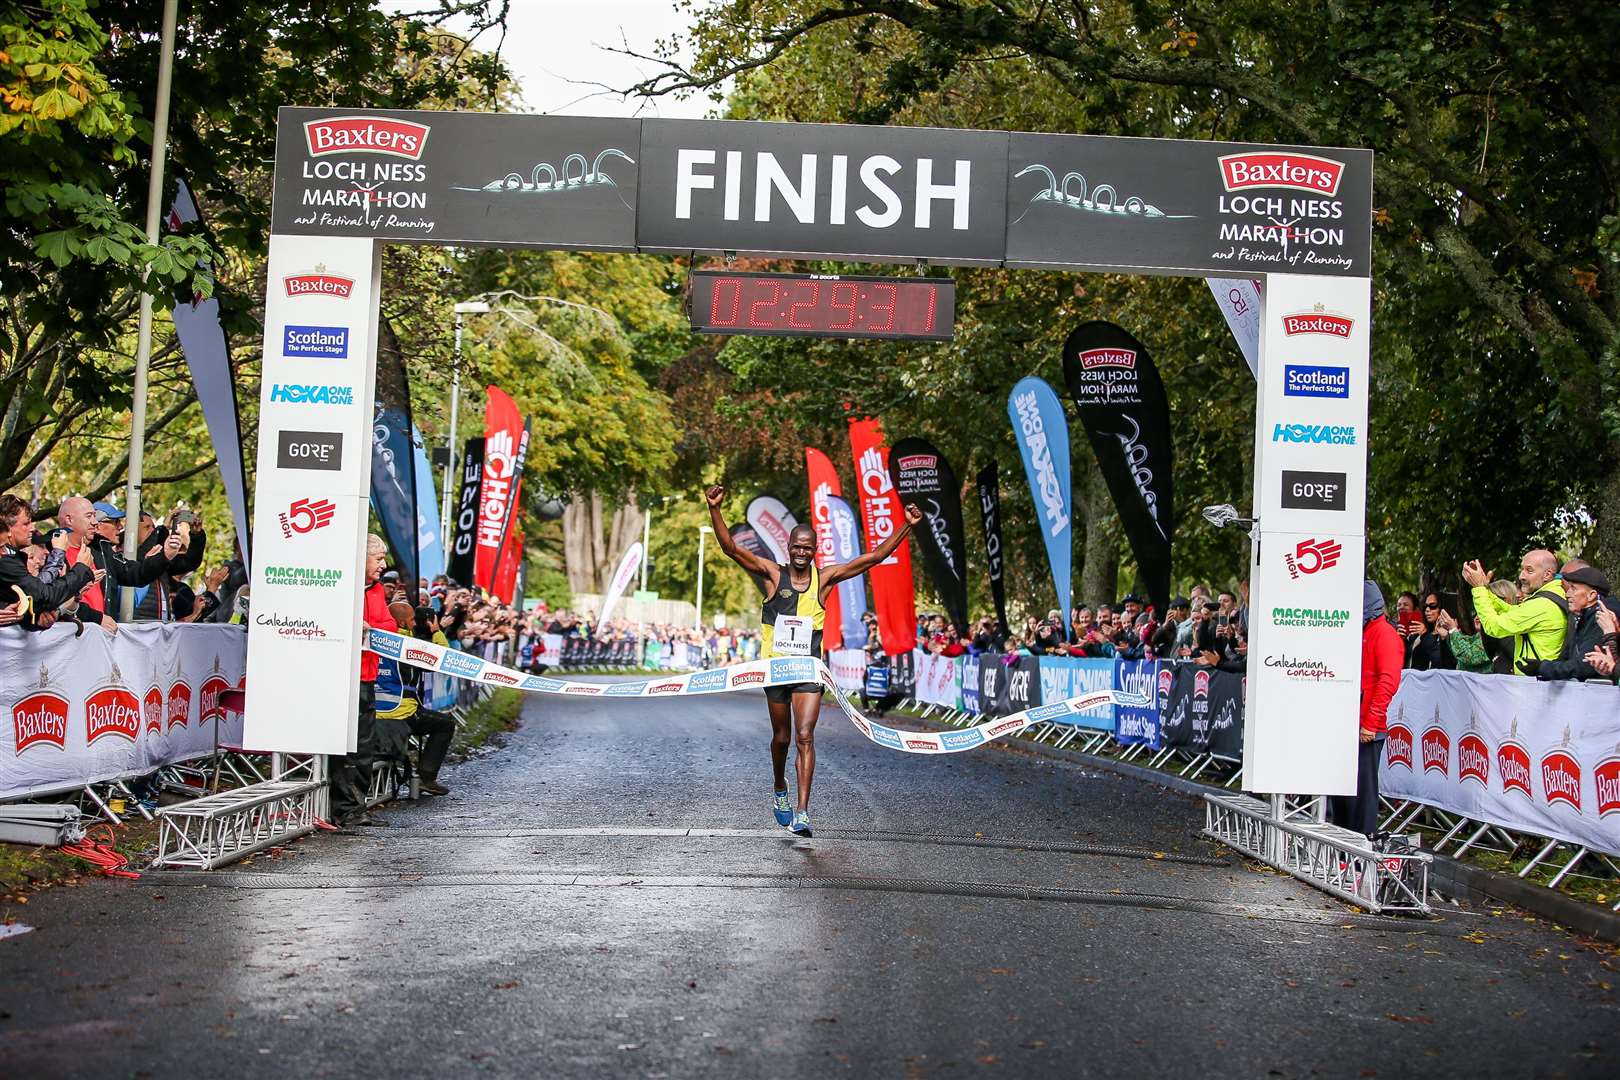 Isaiah Kosgei won the 2019 Loch Ness Marathon in a time of two hours 29 minutes and 31 seconds. Picture: Gary Anthony